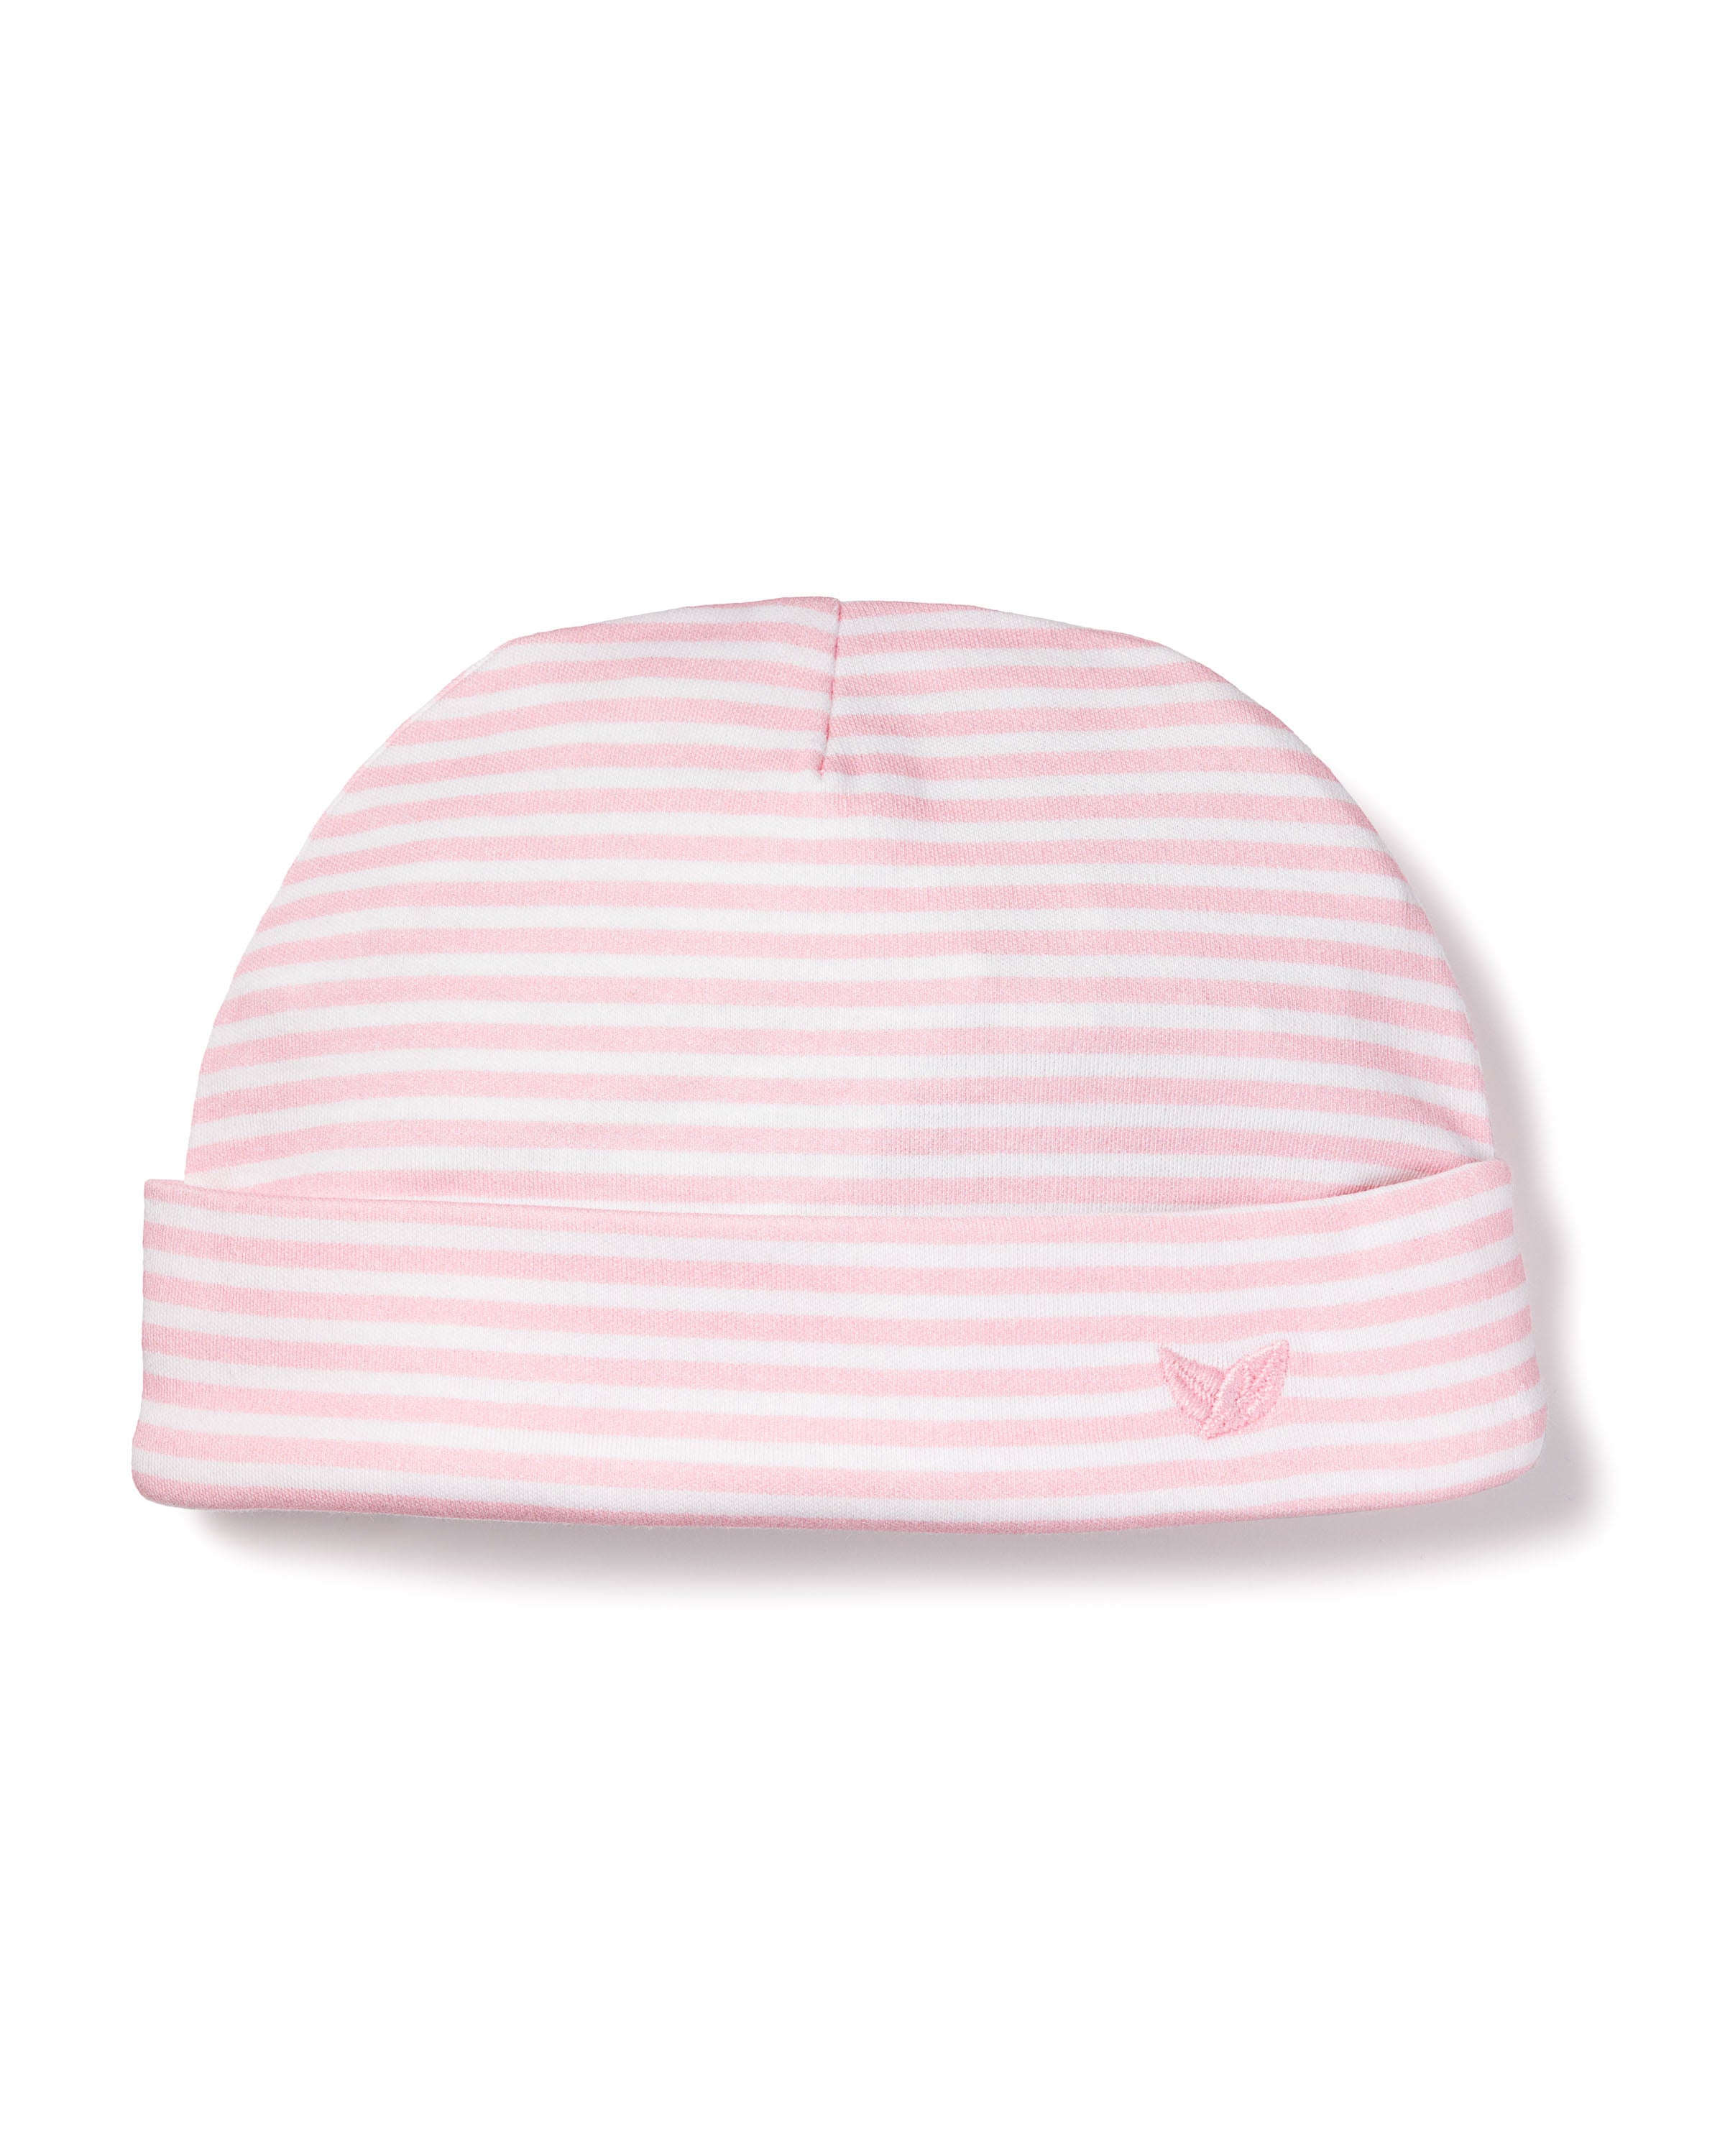 Baby's Pima Hat in Pink Stripes